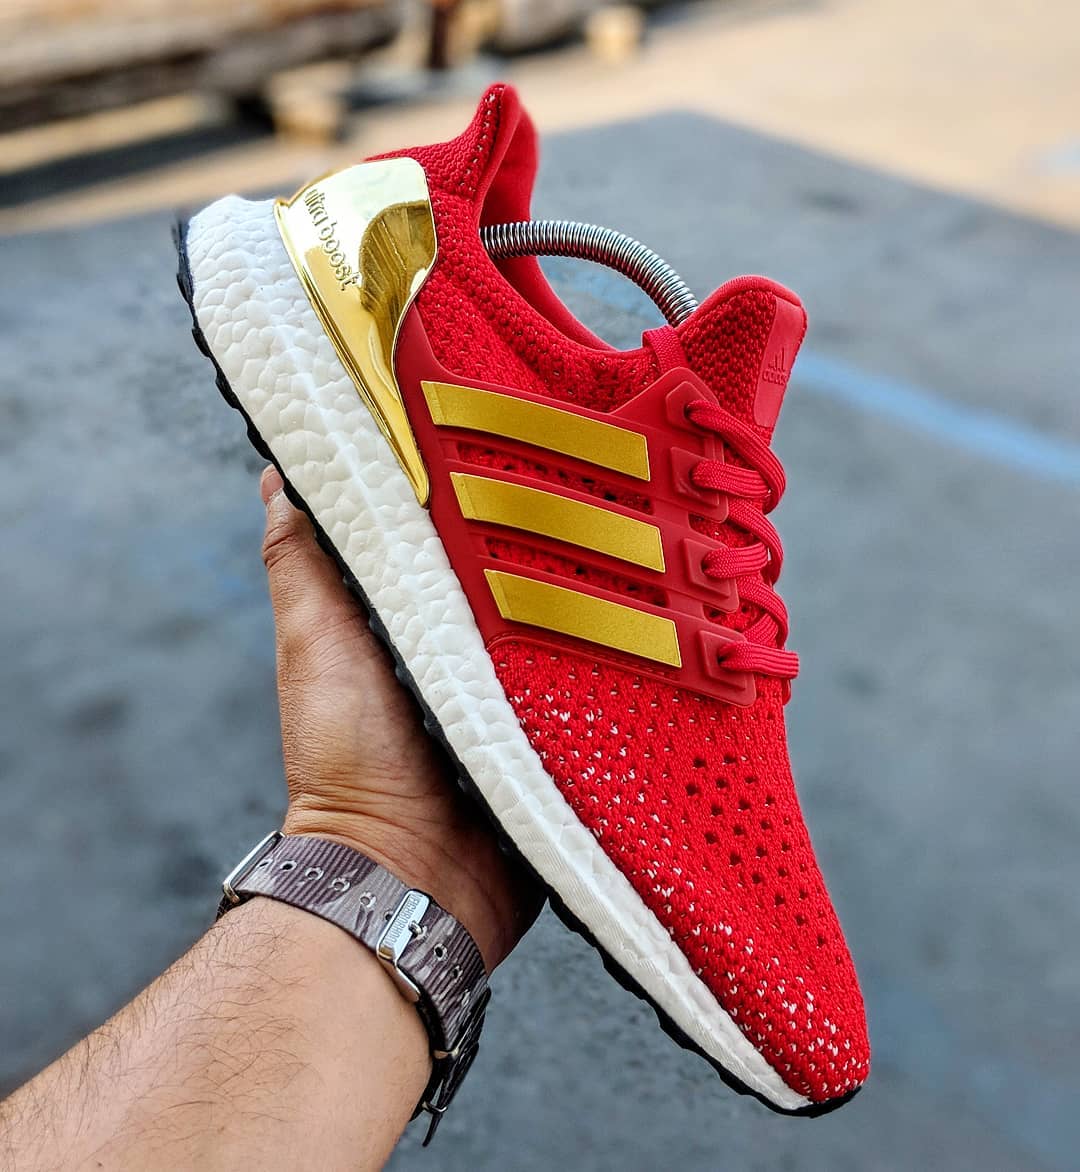 MiAdidas Ultra Boost Clima 49ers